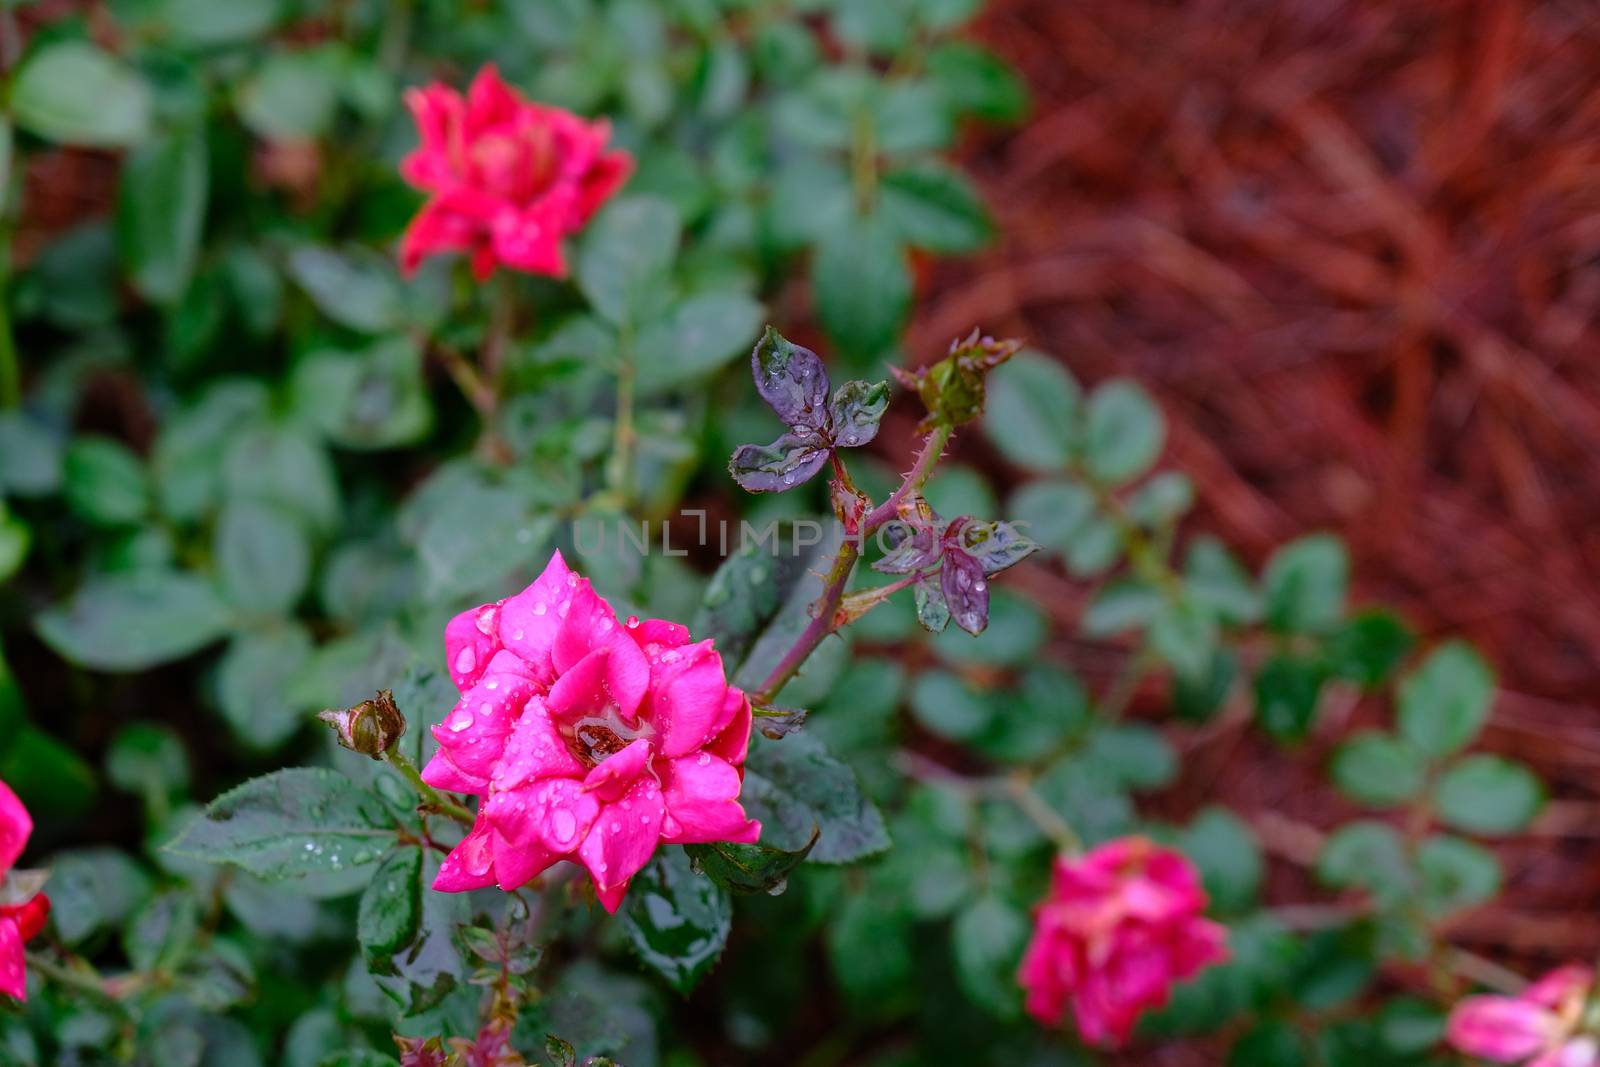 Red and Pink Roses in Rain in a Landscaped Garden